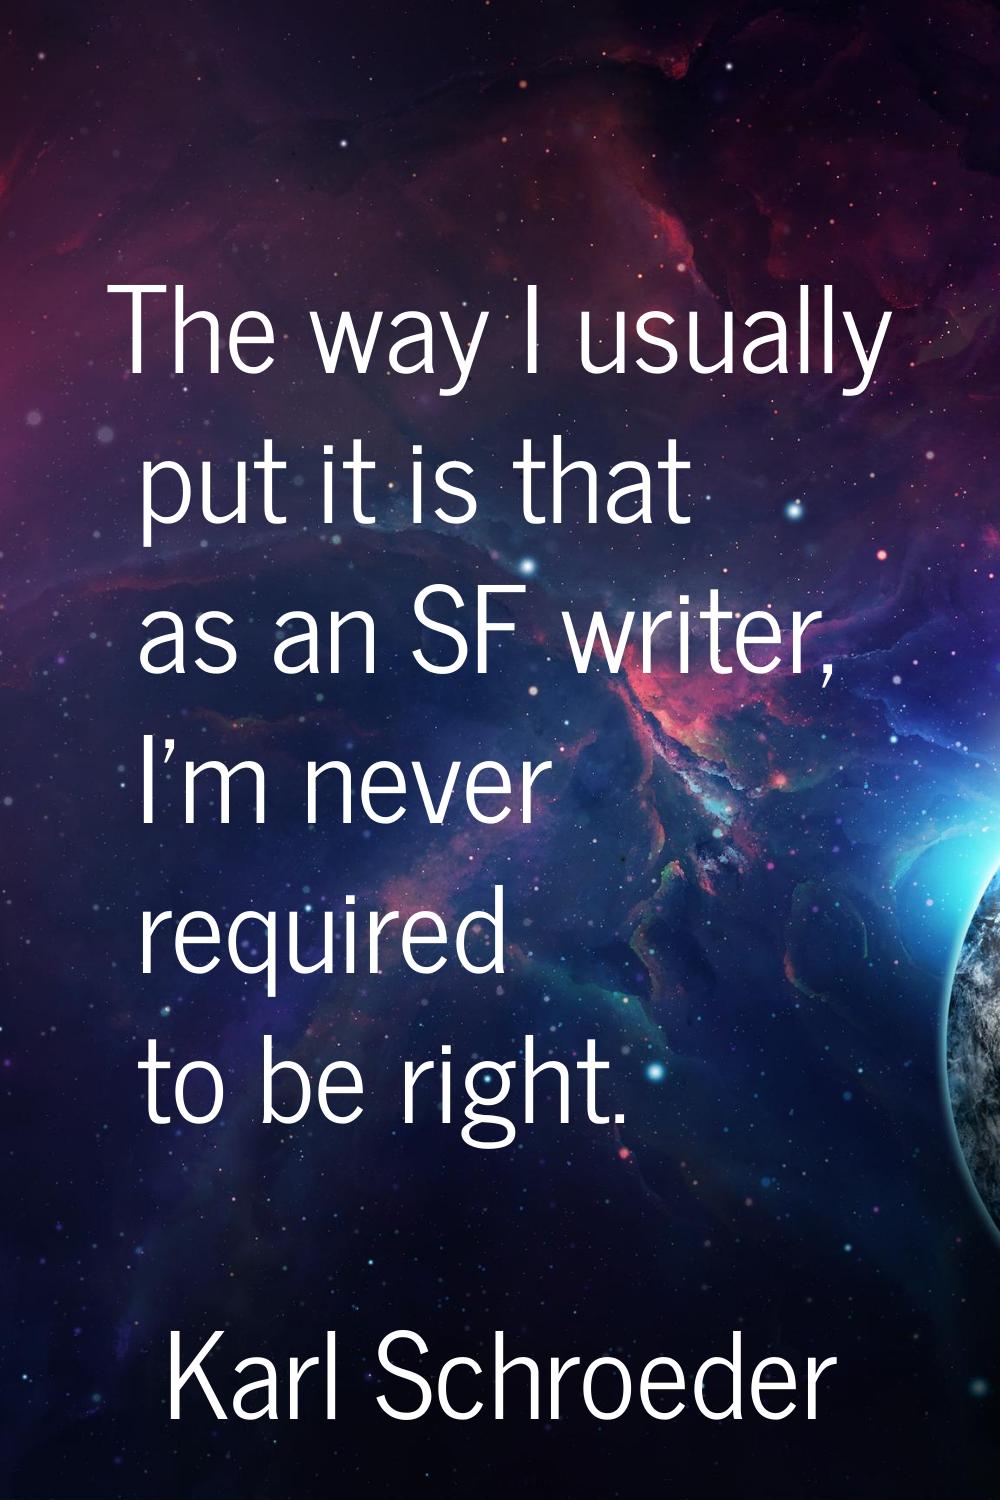 The way I usually put it is that as an SF writer, I'm never required to be right.